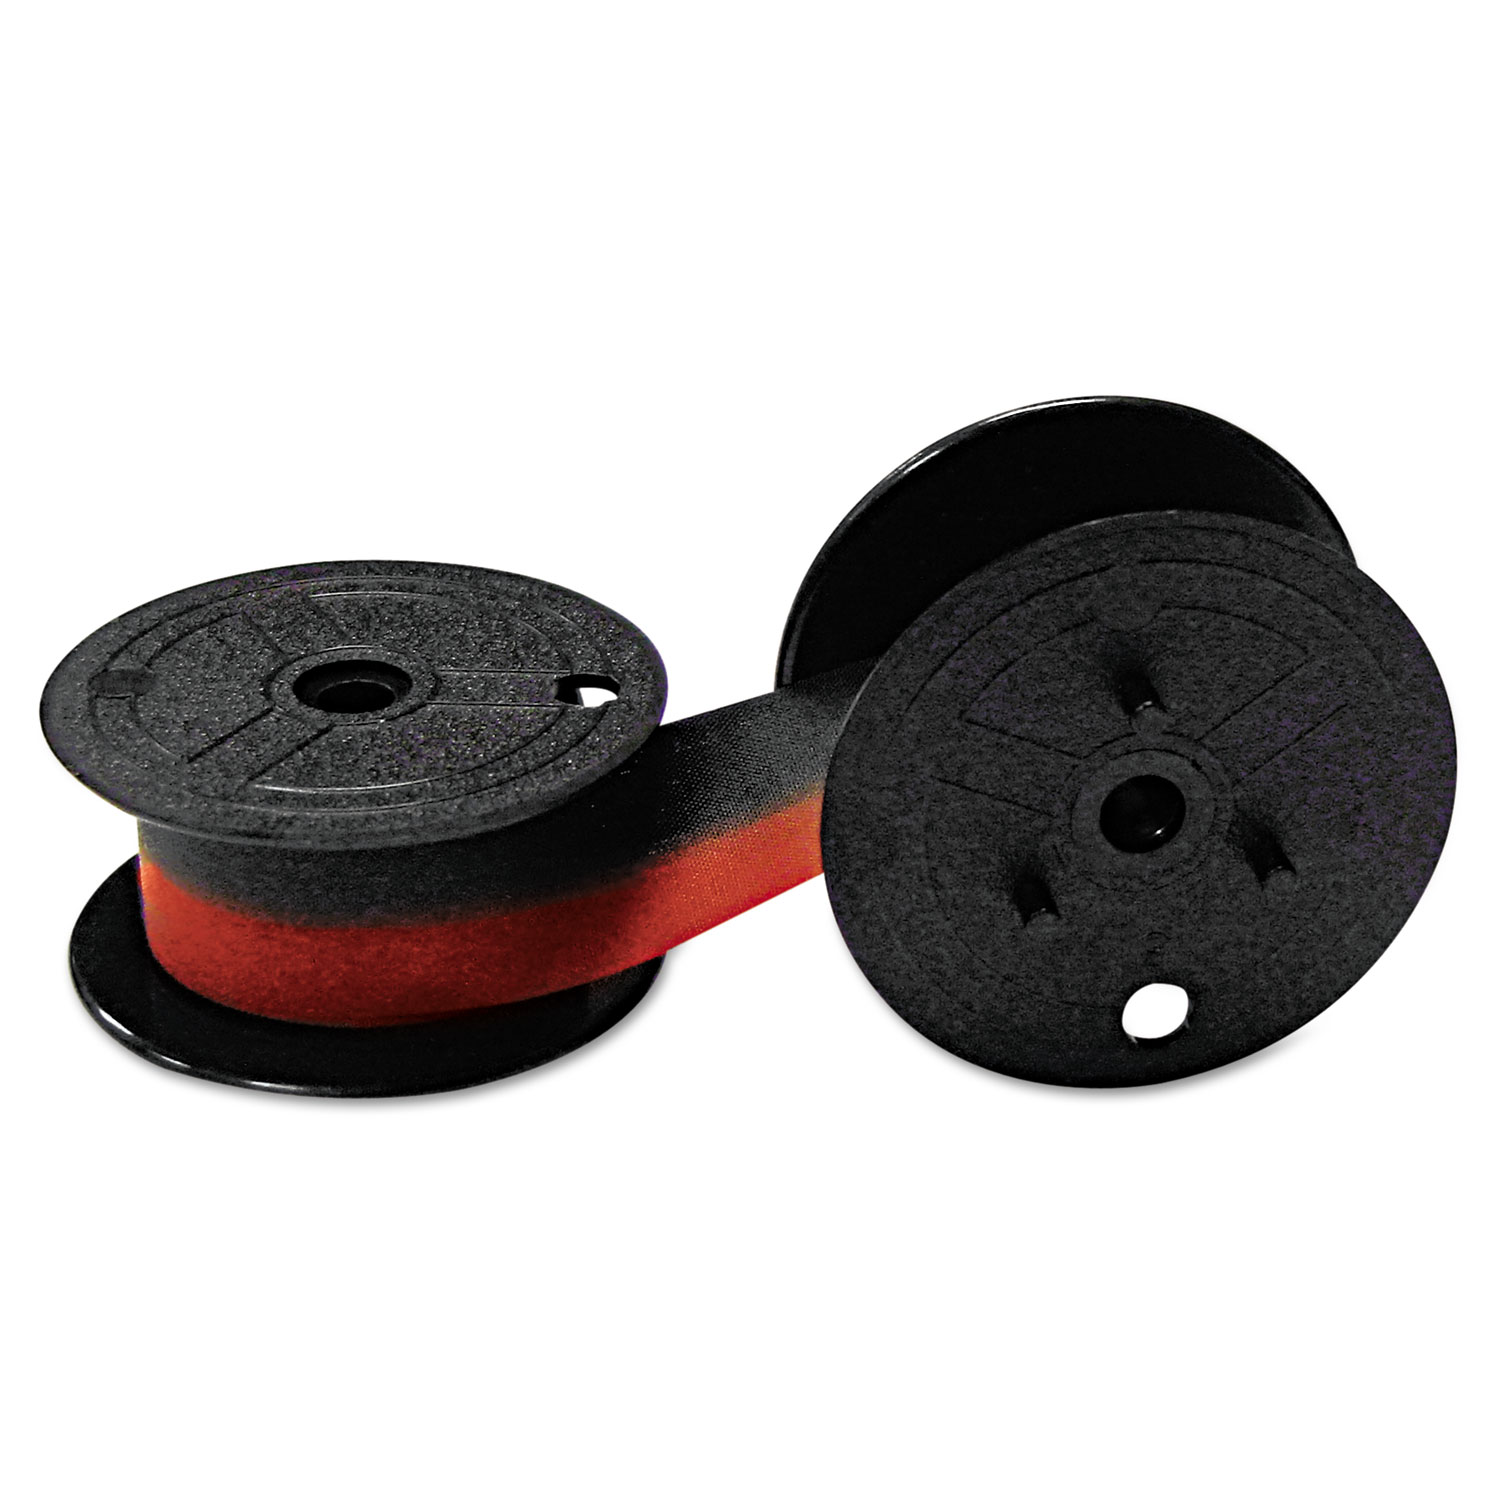  Victor 7010 7010 Compatible Calculator Ribbon, Black/Red (VCT7010) 